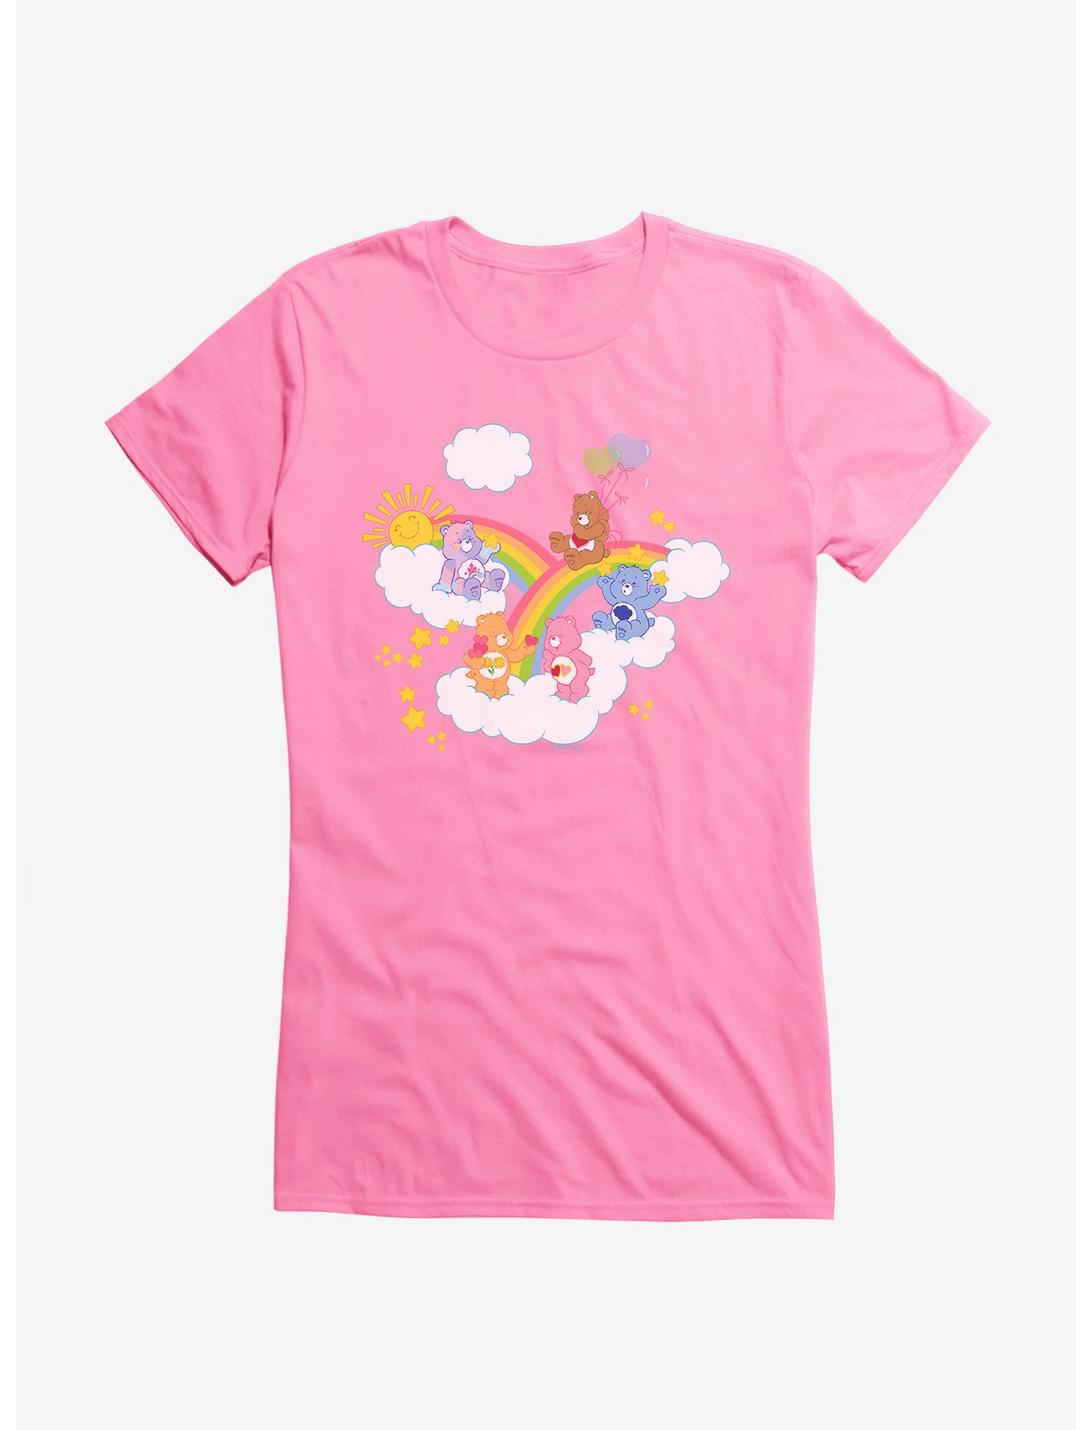 Care Bears Over The Rainbow Girls T-Shirt, CHARITY PINK, hi-res